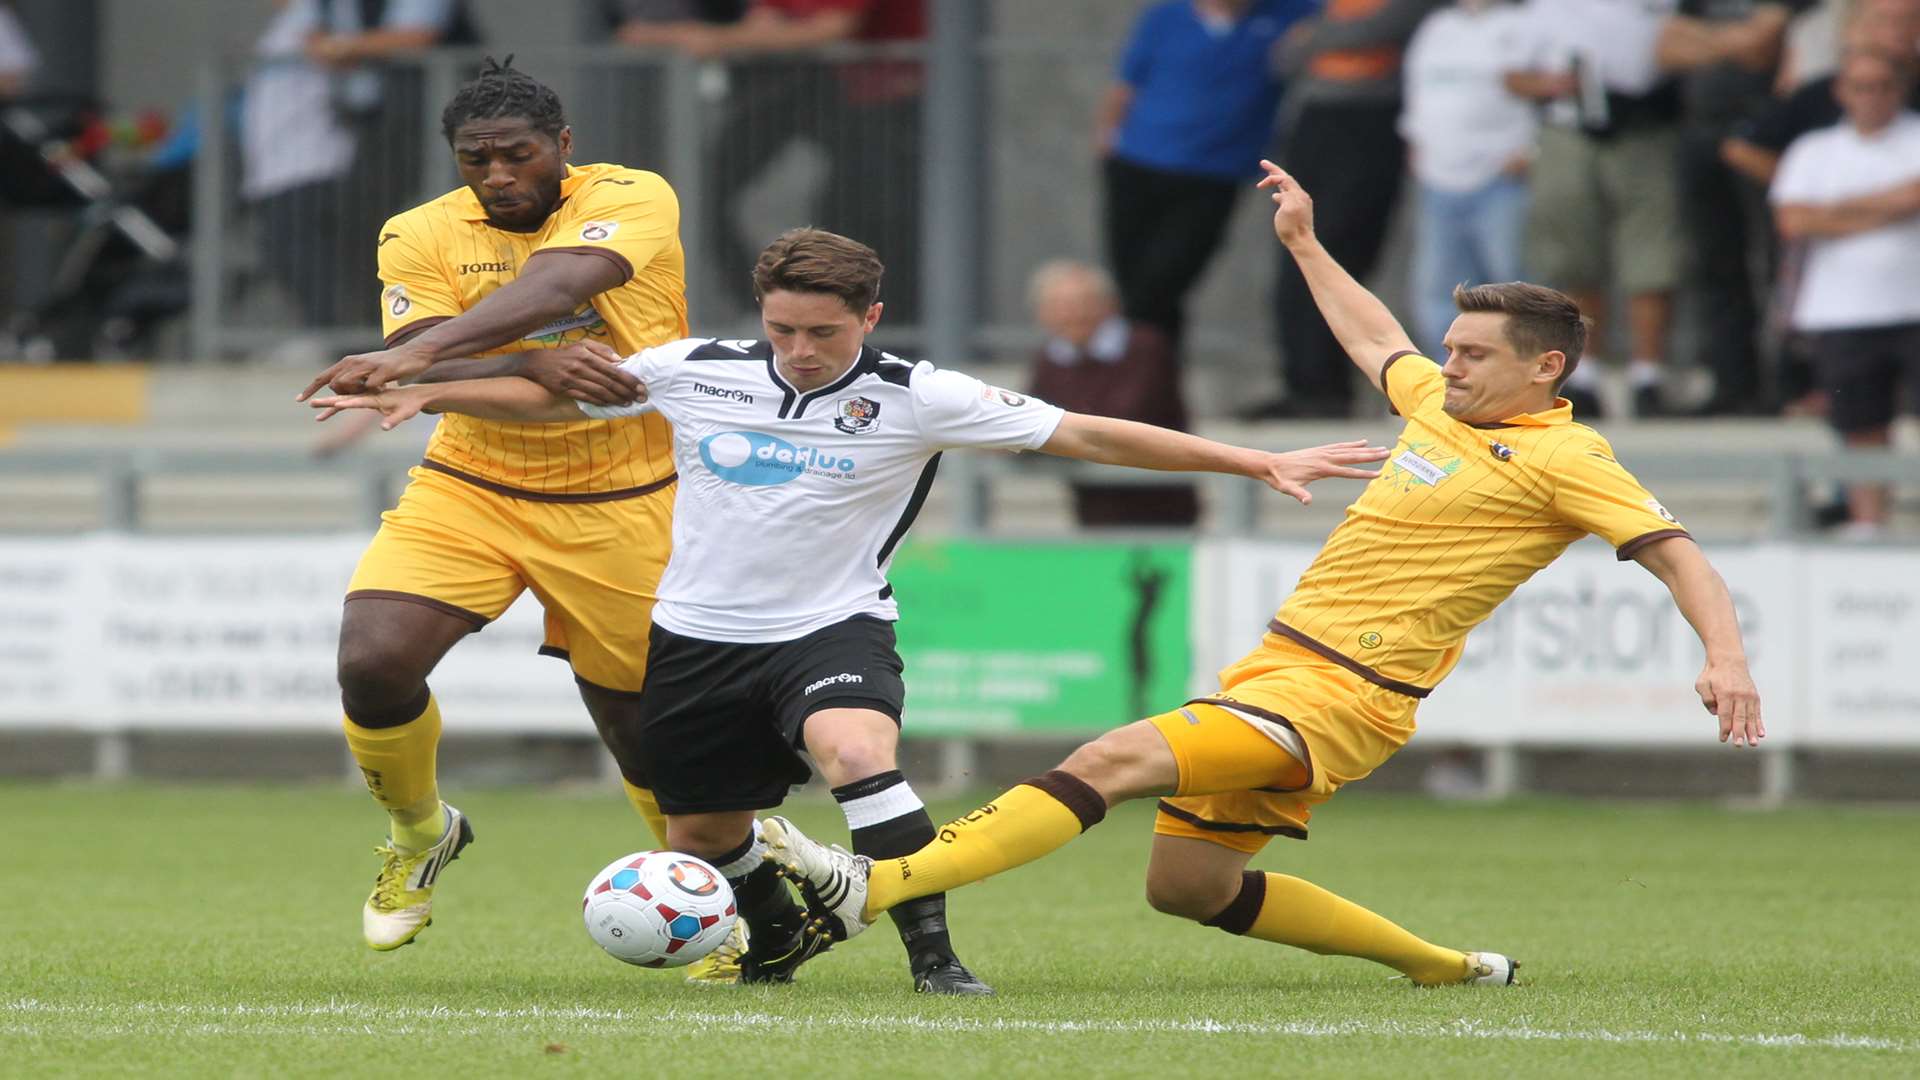 Dartford's Lee Noble gets between two Sutton players Picture: John Westhrop